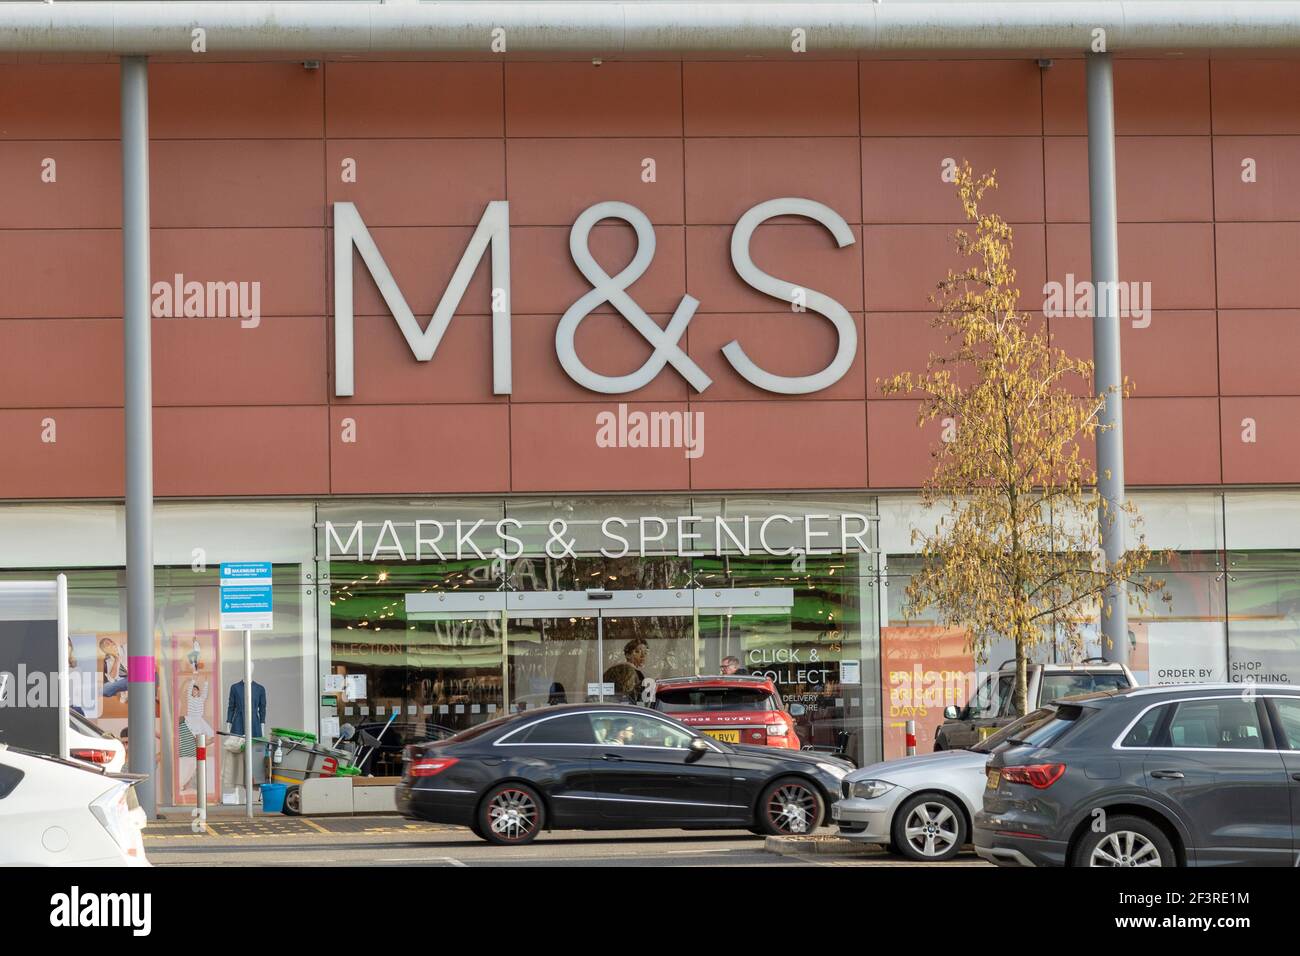 A large Marks & Spencer store logo at a shopping centre Stock Photo